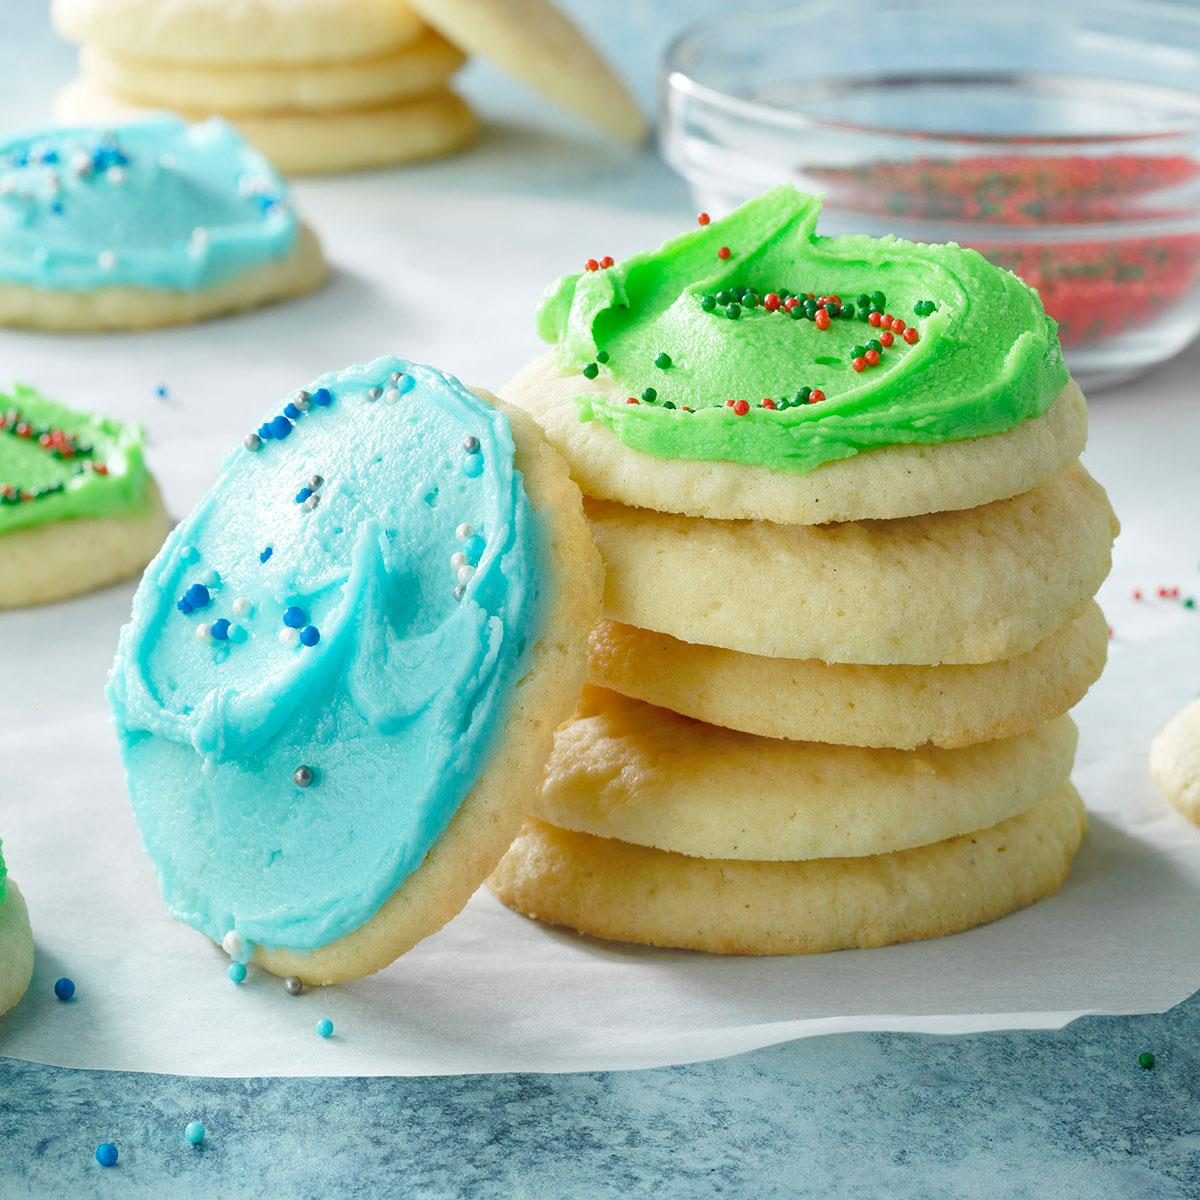 4 Types of Food Coloring to Use When Making Cookies